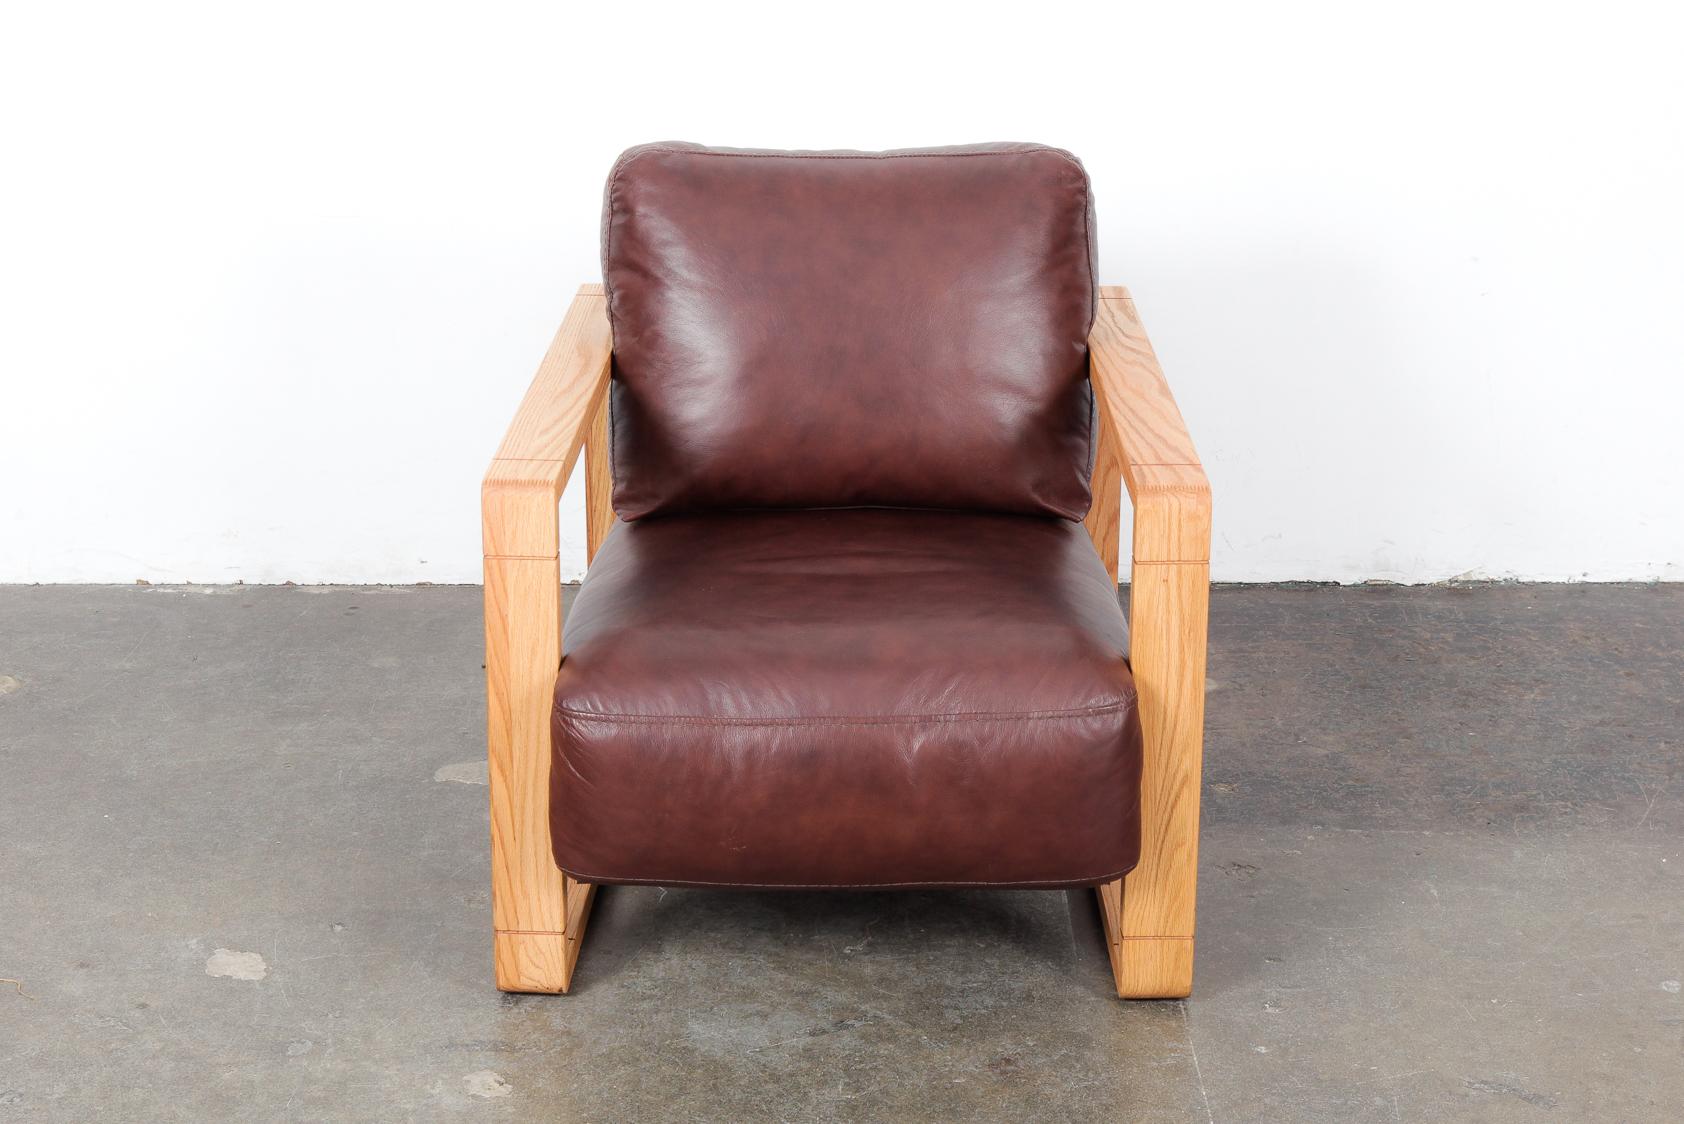 Swedish solid oak framed lounge chair with original chocolate brown leather. Newly refinished oak frame in a natural wax finish. Original leather is in very good condition. Box style sides and back, very clean lines coupled with the rich leather.